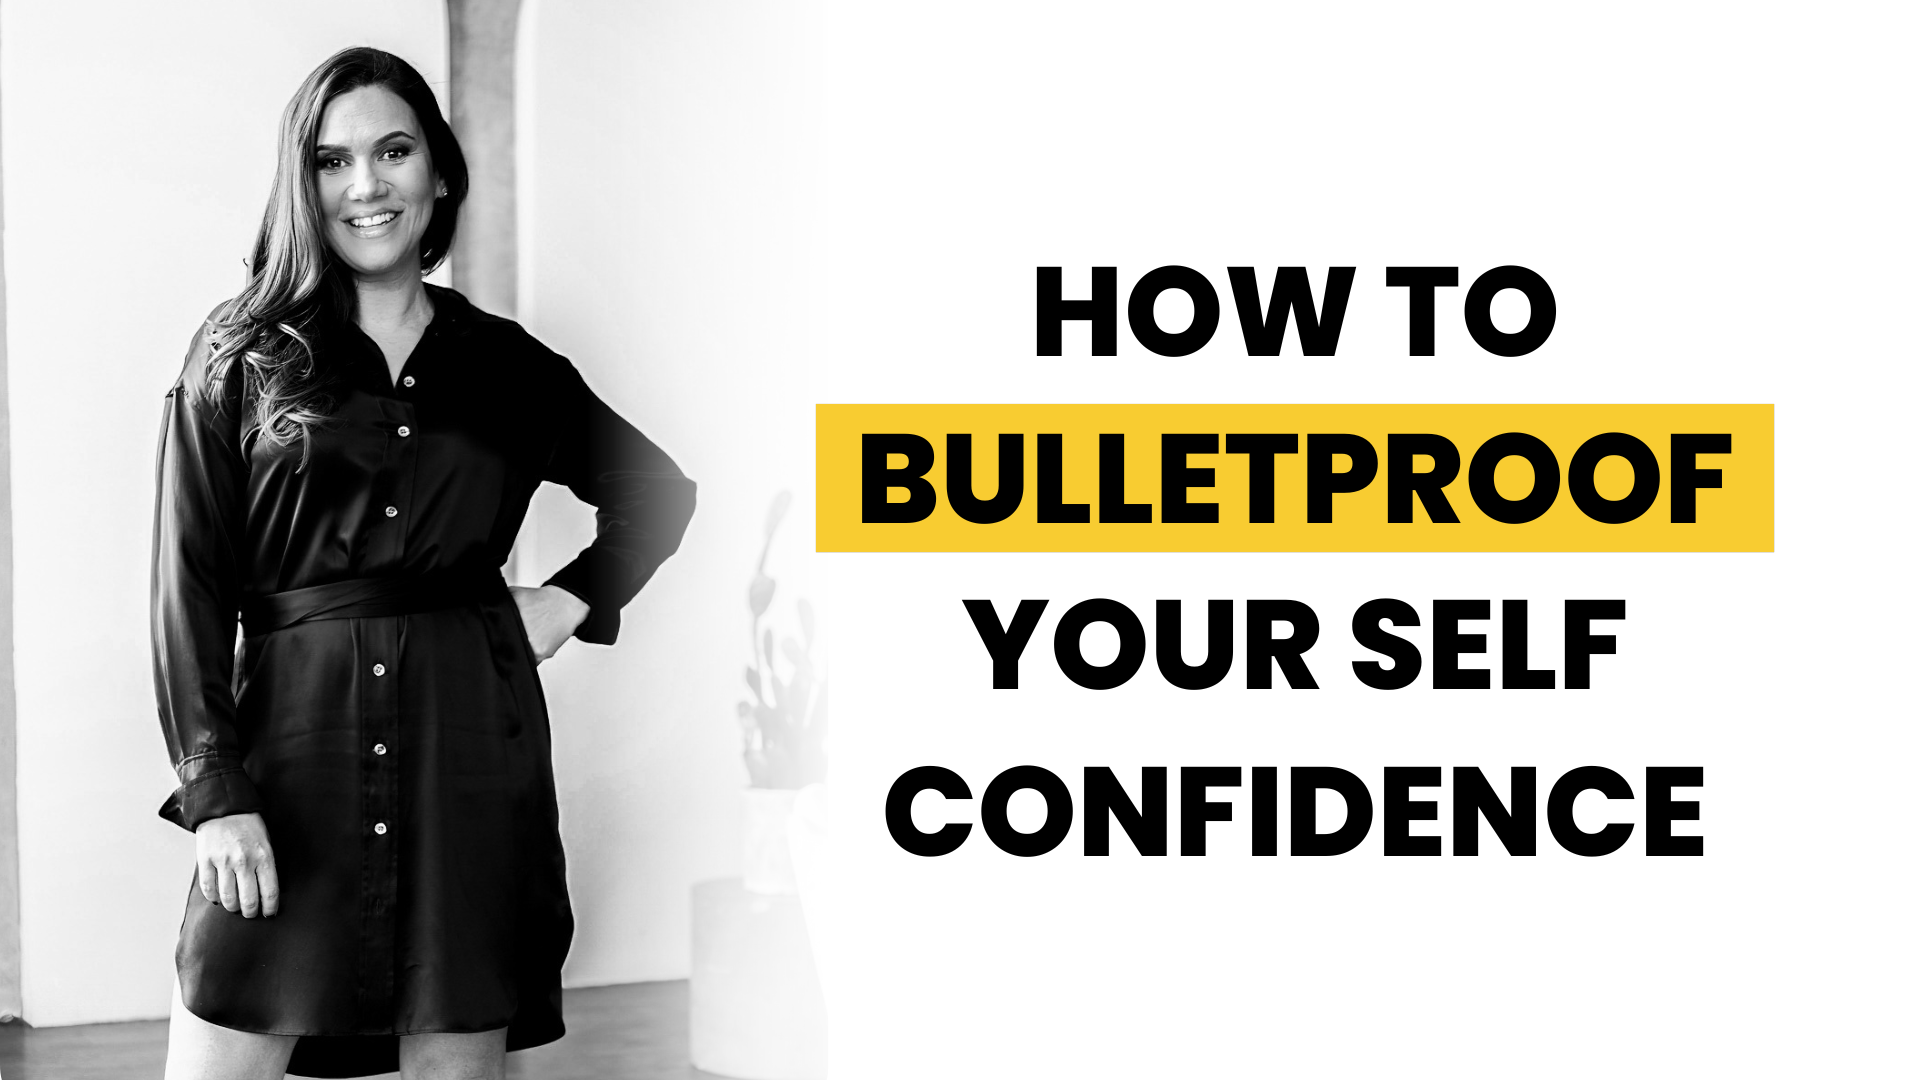 How to bulletproof your self confidence